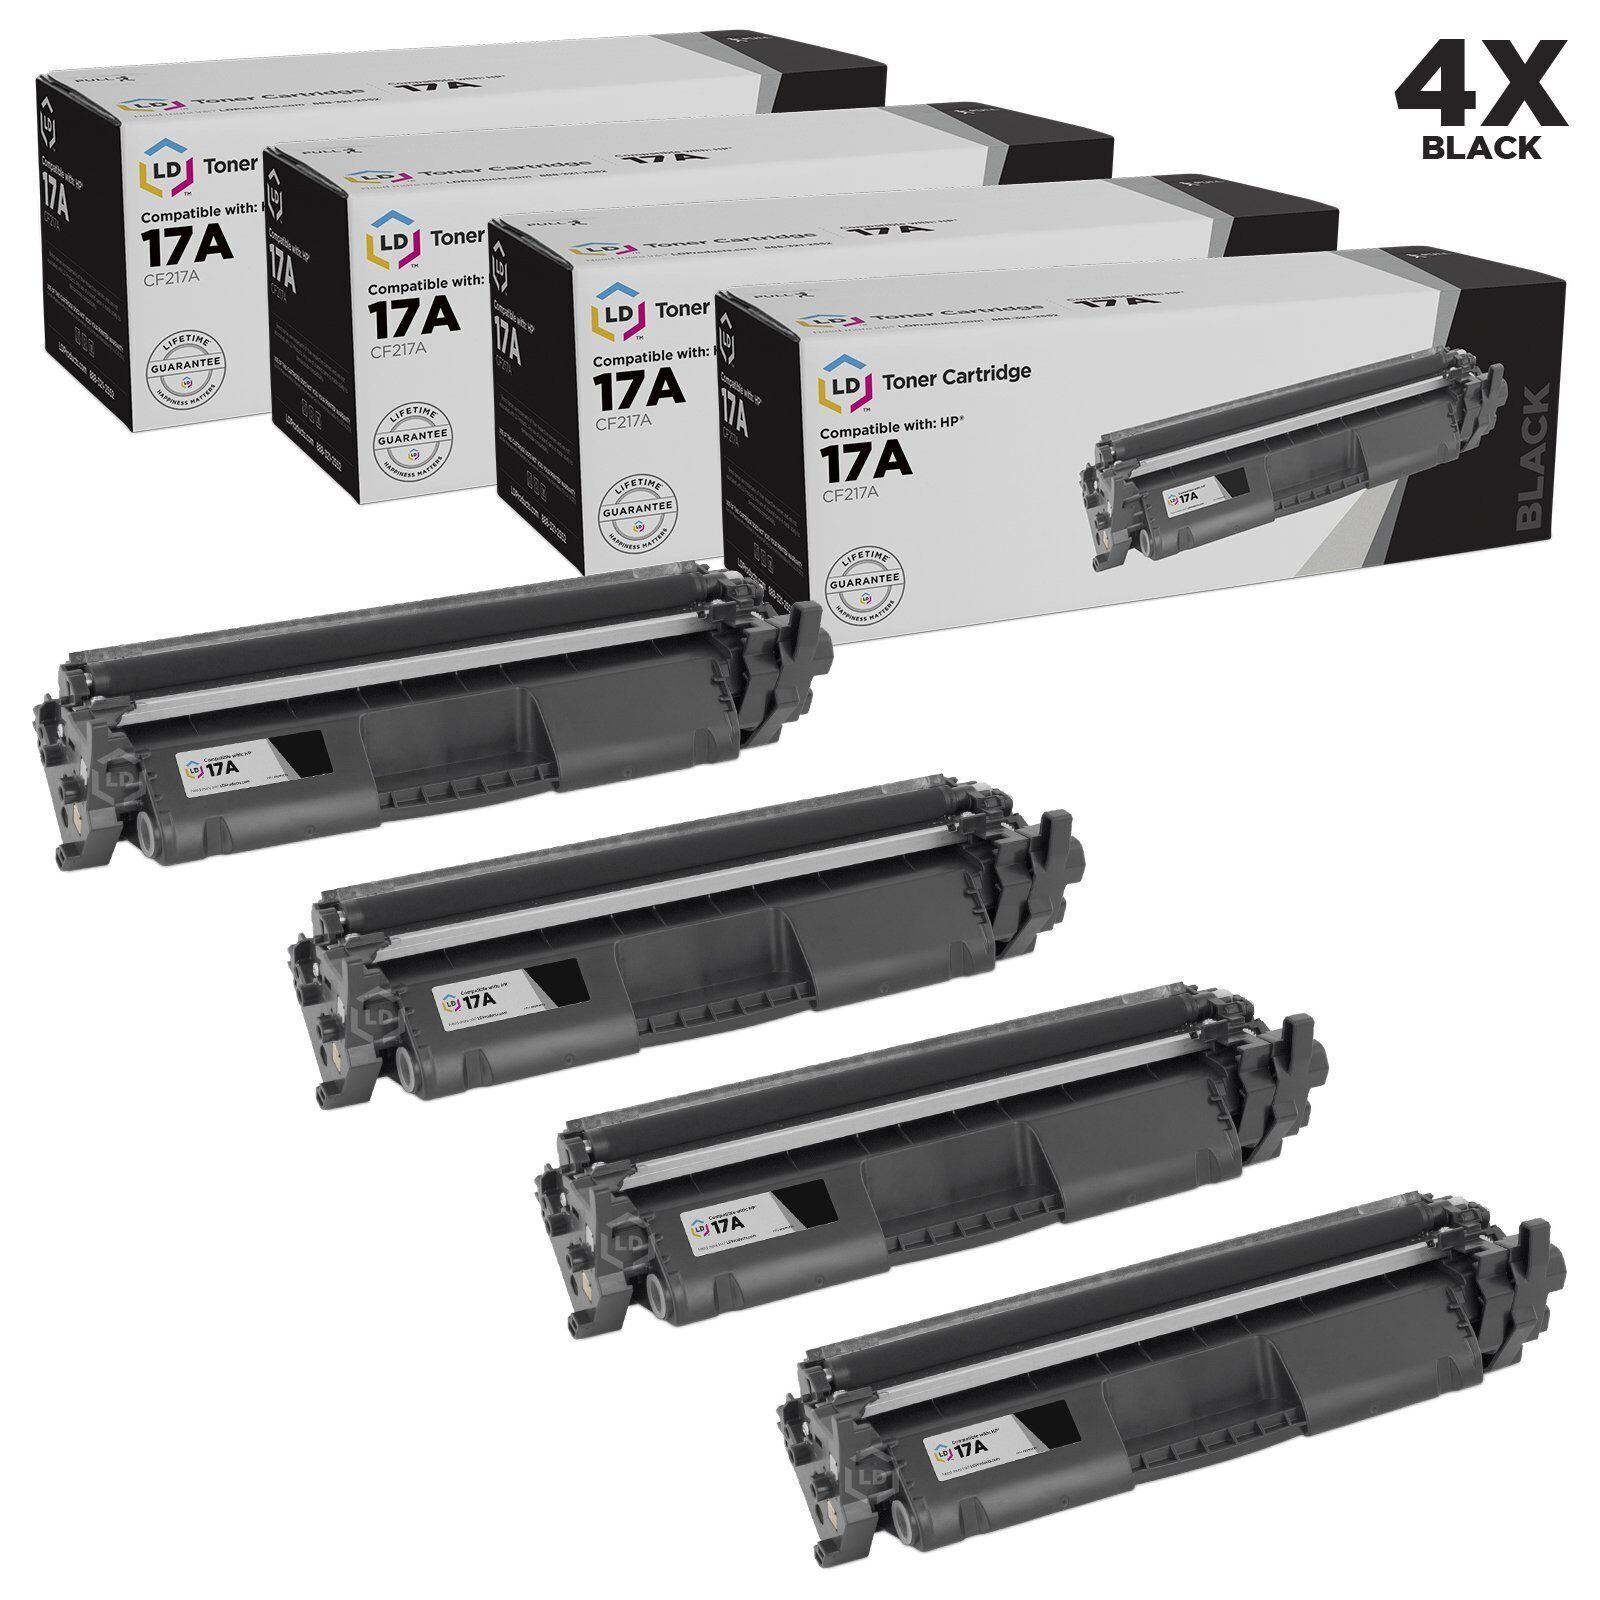 LD Compatible HP CF217A (17A) Black Toner 4PK for M102a, M130a, M130nw, M130fn